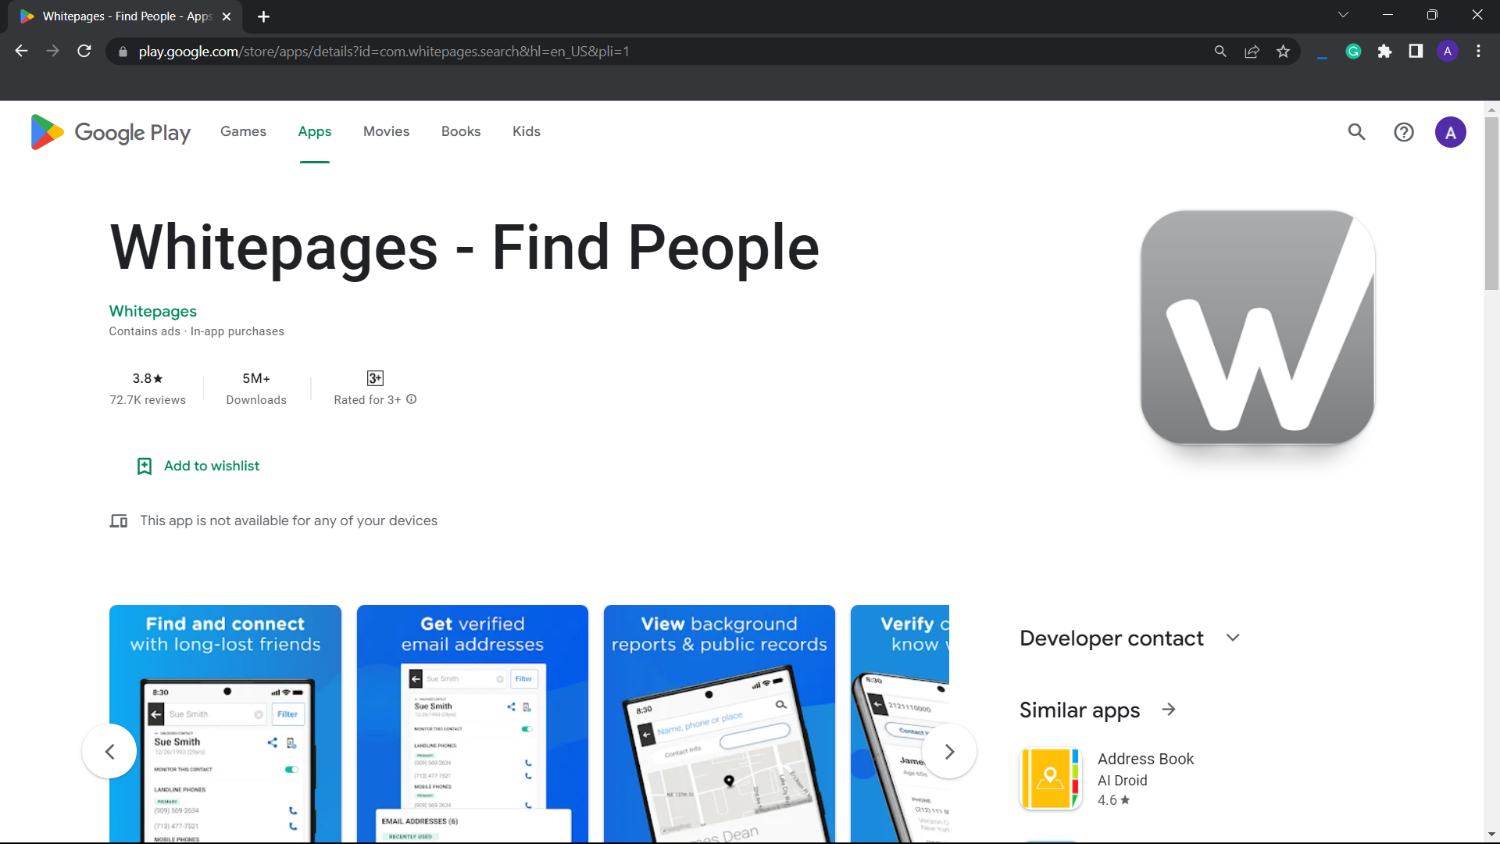 whitepages app